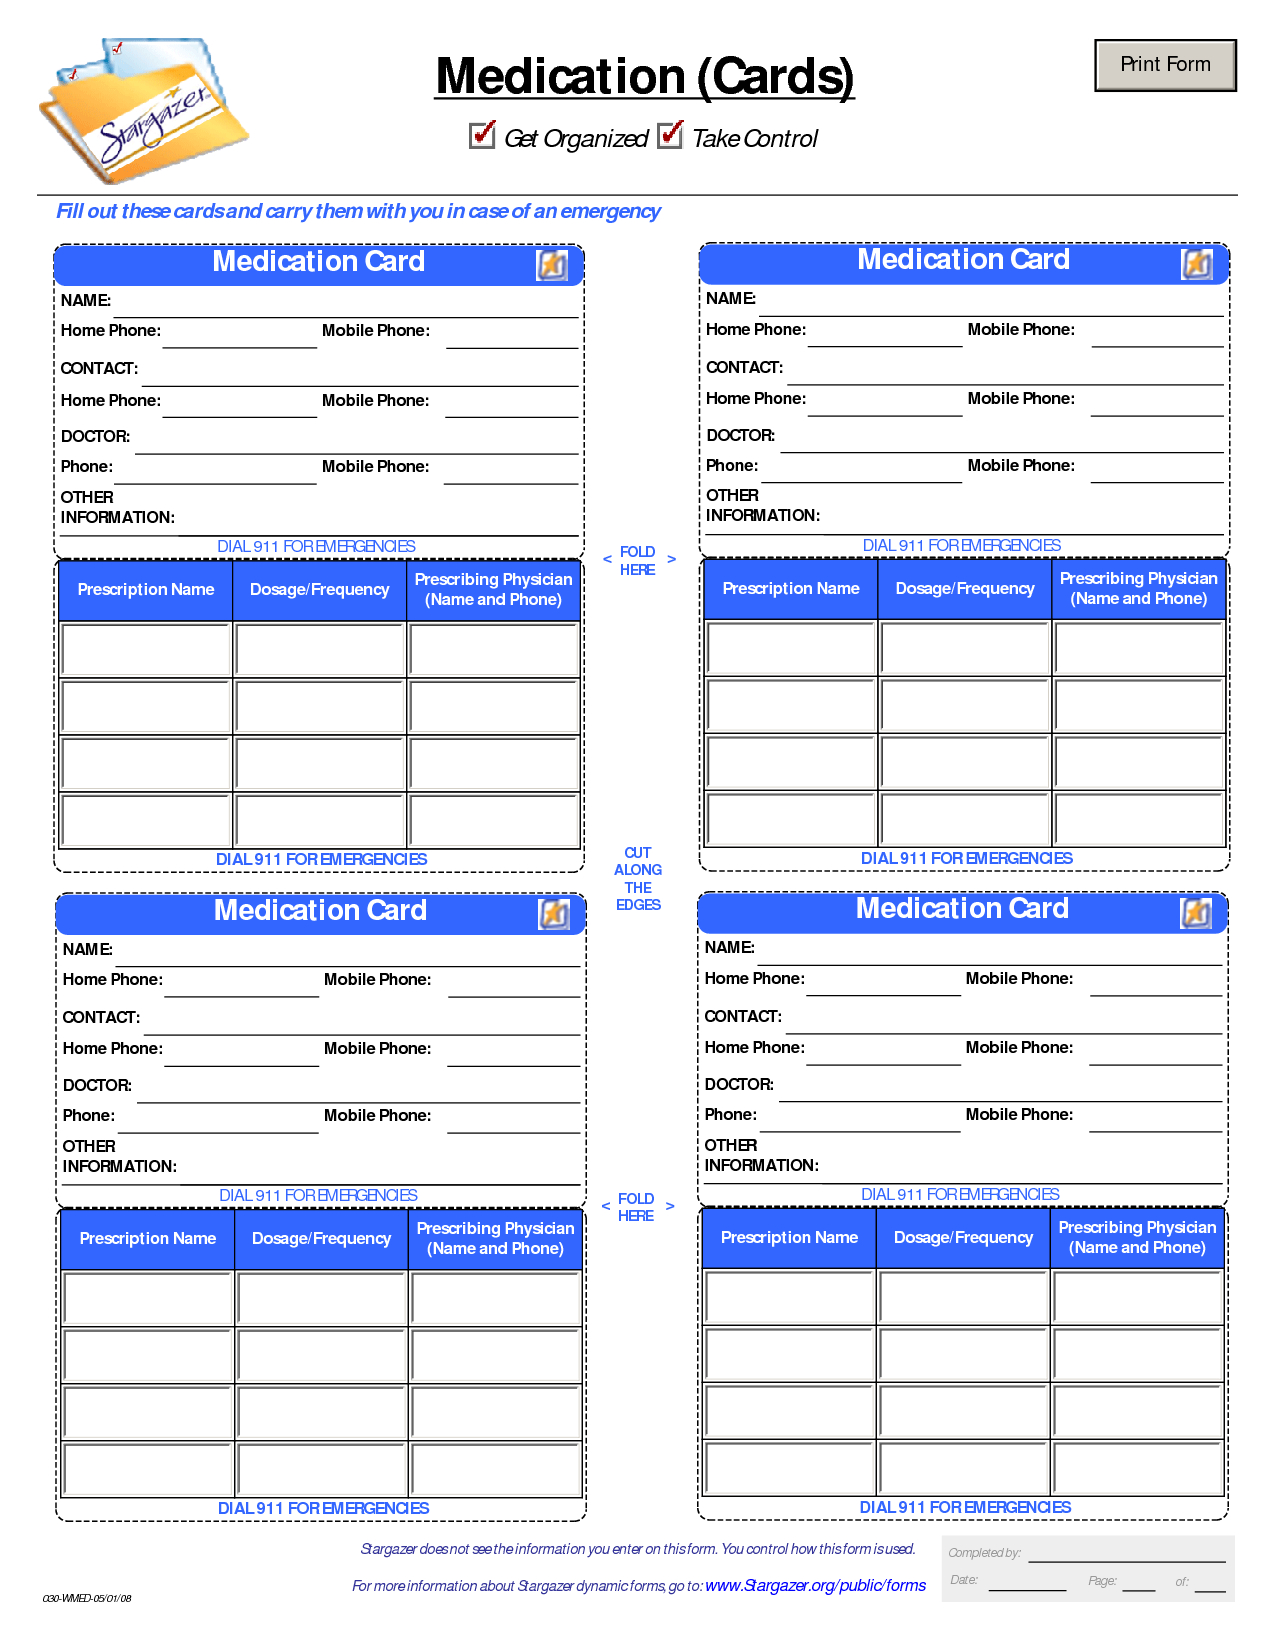 Patient Medication Card Template | Emergency Kits | Medication List - Free Printable Id Cards Templates